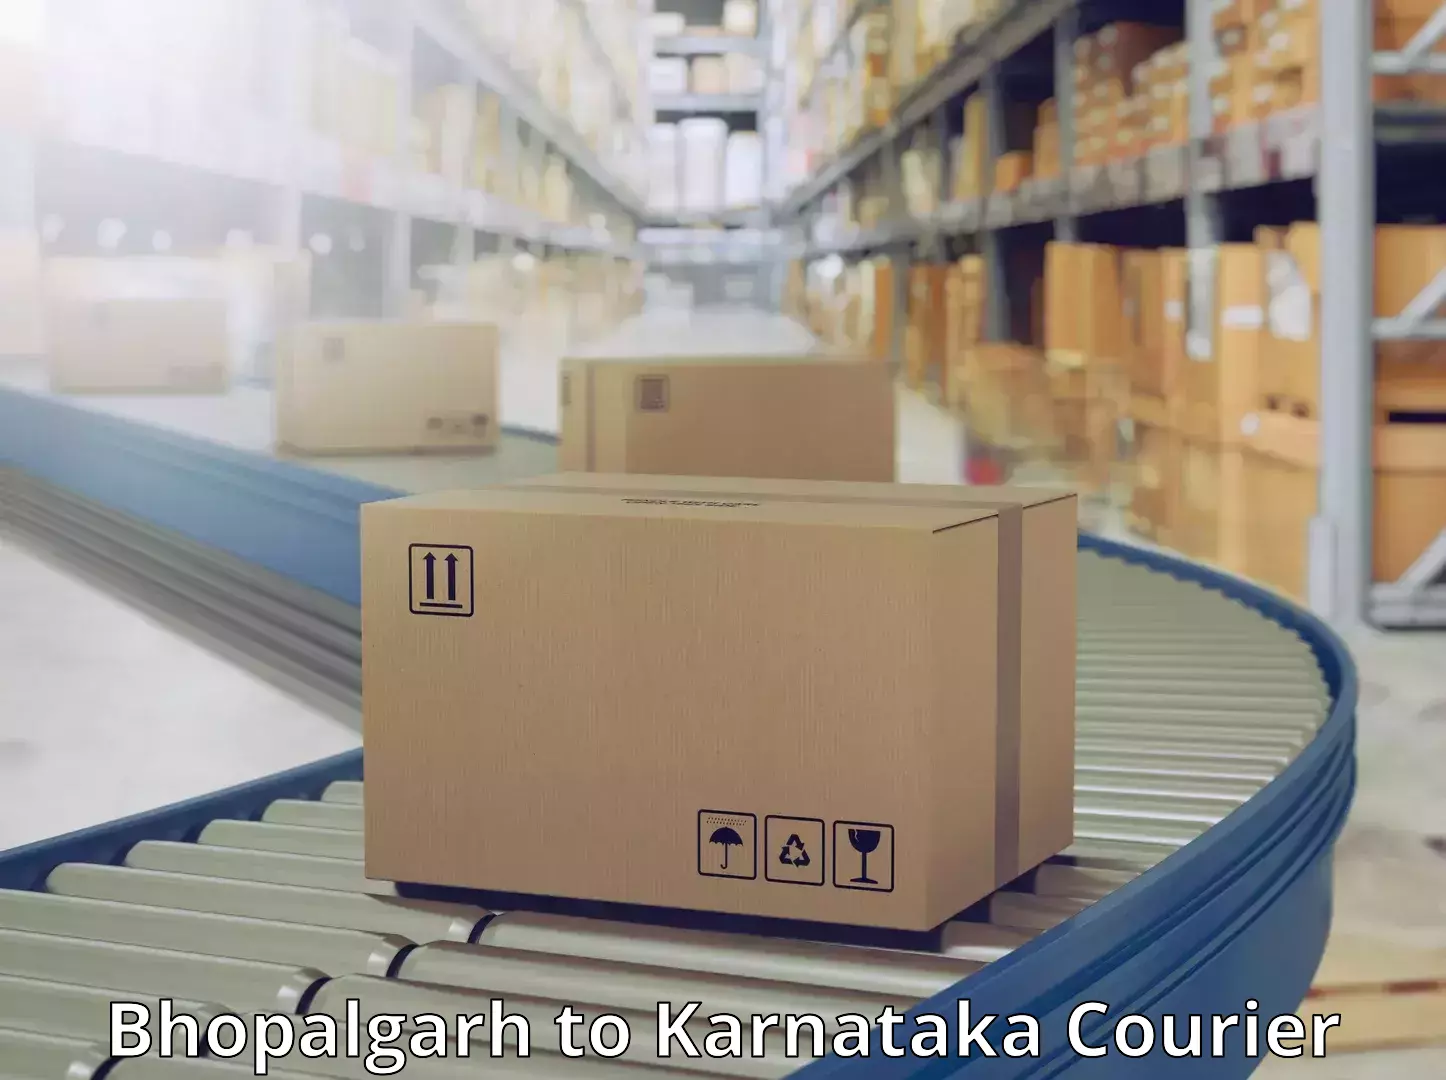 Multi-national courier services Bhopalgarh to Surathkal